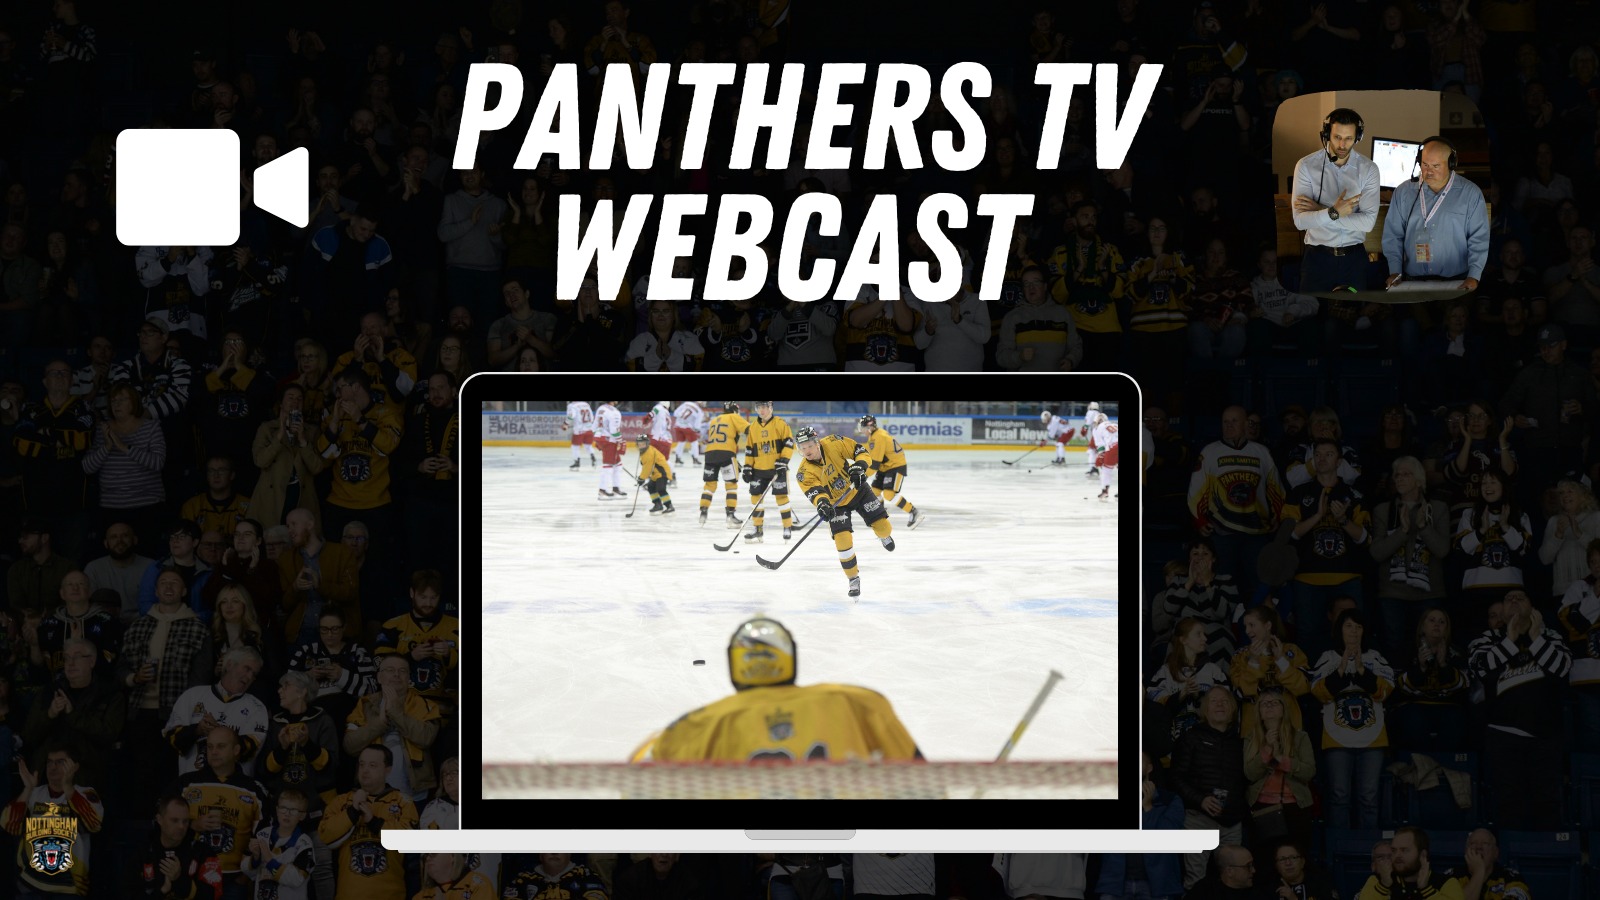 WATCH PANTHERS PLAY STEELERS LIVE ON A WEBCAST